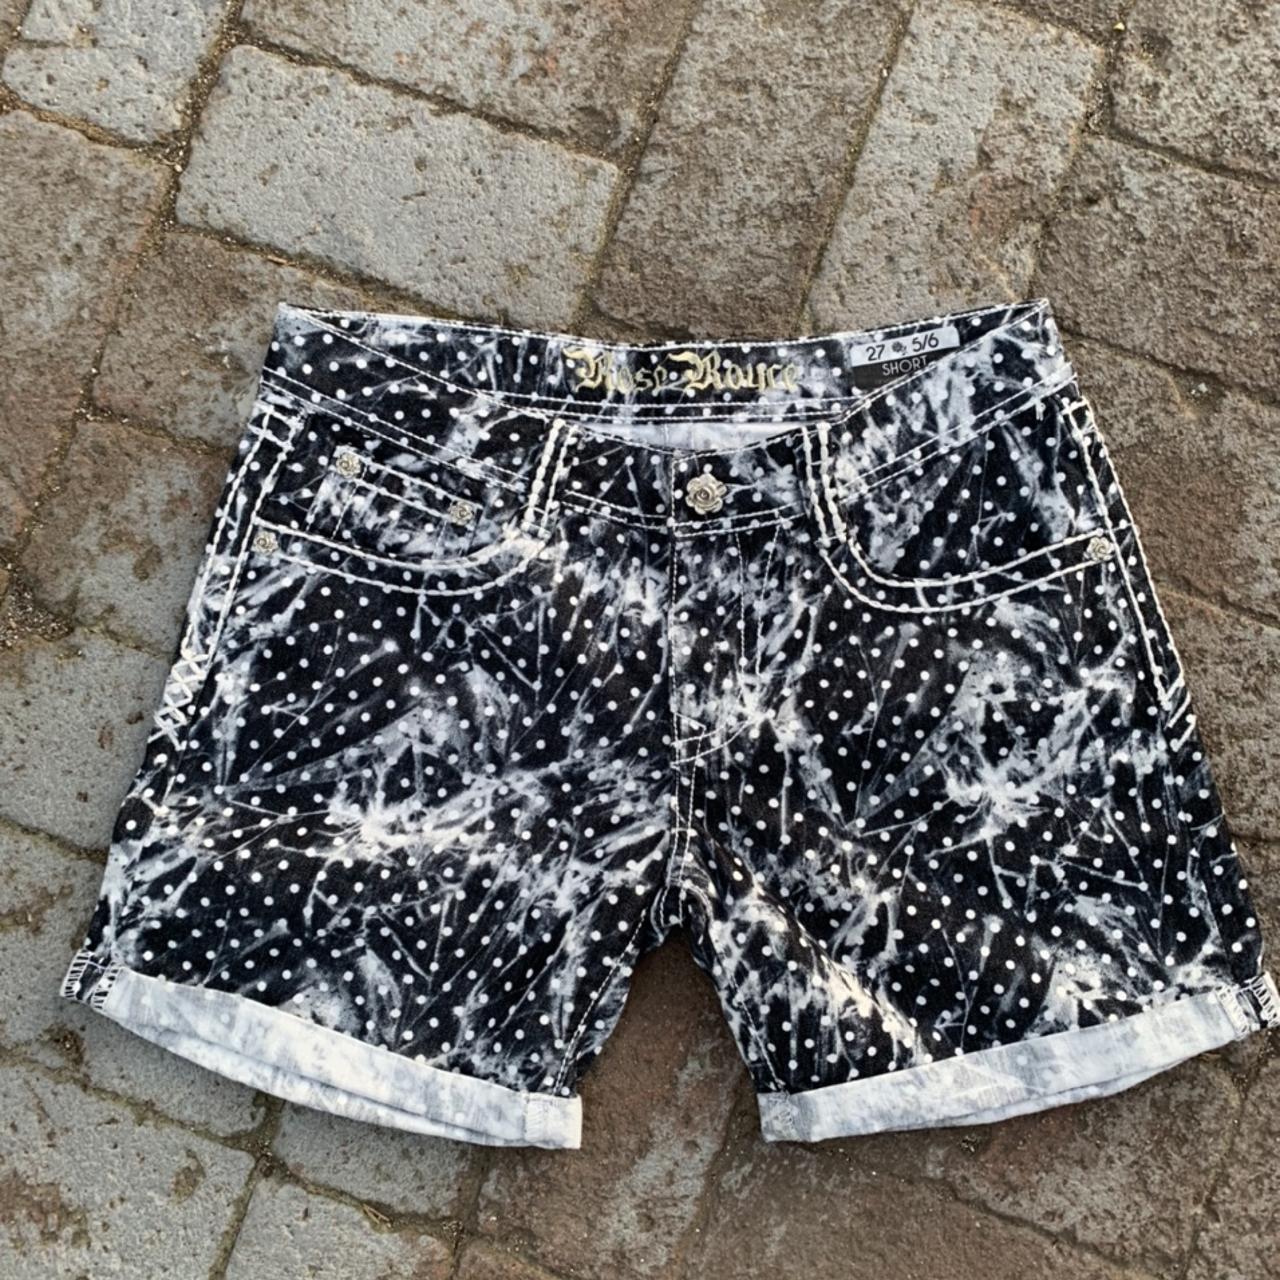 Product Image 1 - Rose Royce Shorts

New without tags

▪️All